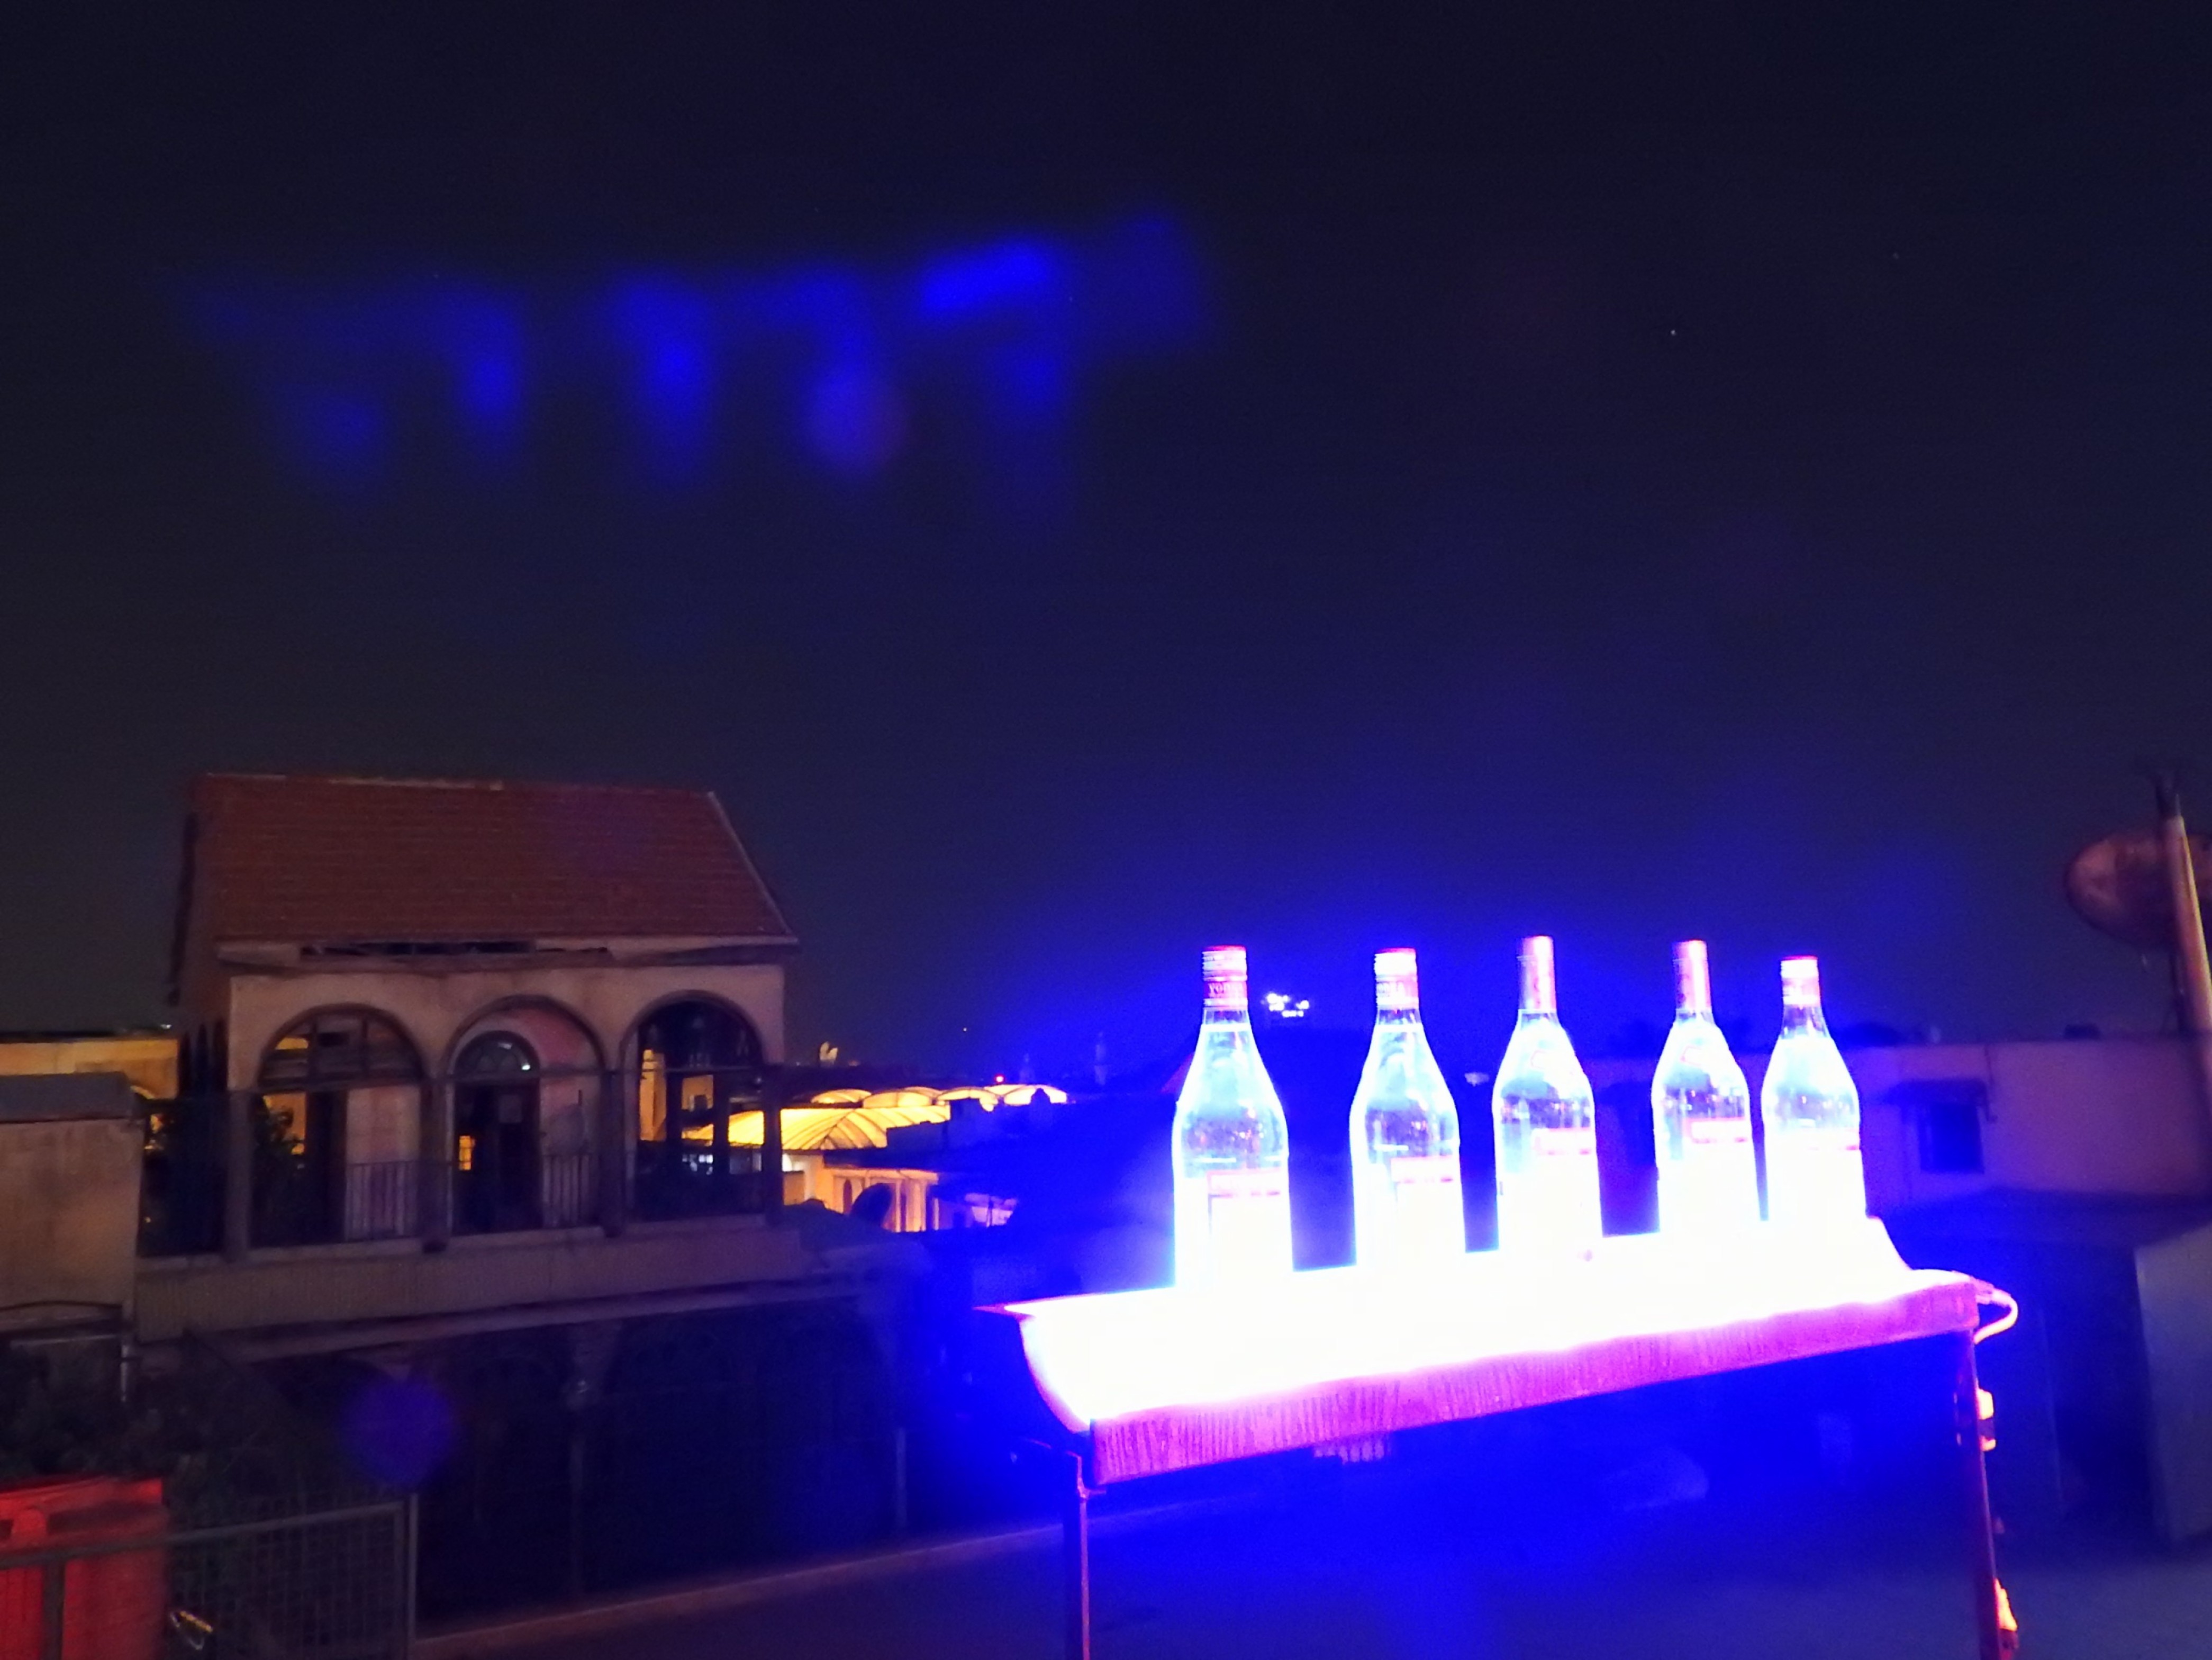  Le Visage, also in the East Gate quarter, was among the first outdoor establishment to open after the mortars stopped some months ago. From its rooftop position, one can look down on the historic Straight Street leading up to East Gate, as well as see life on balconies opposite, where months prior they were empty. A display of lighted alcohol bottles gleam in the dark, with Jobar less than 1 km beyond. A Damascus youth noted: “Imagine, ISIS are about 4 km away and we are opening new bars. This is the Syrian people.” 